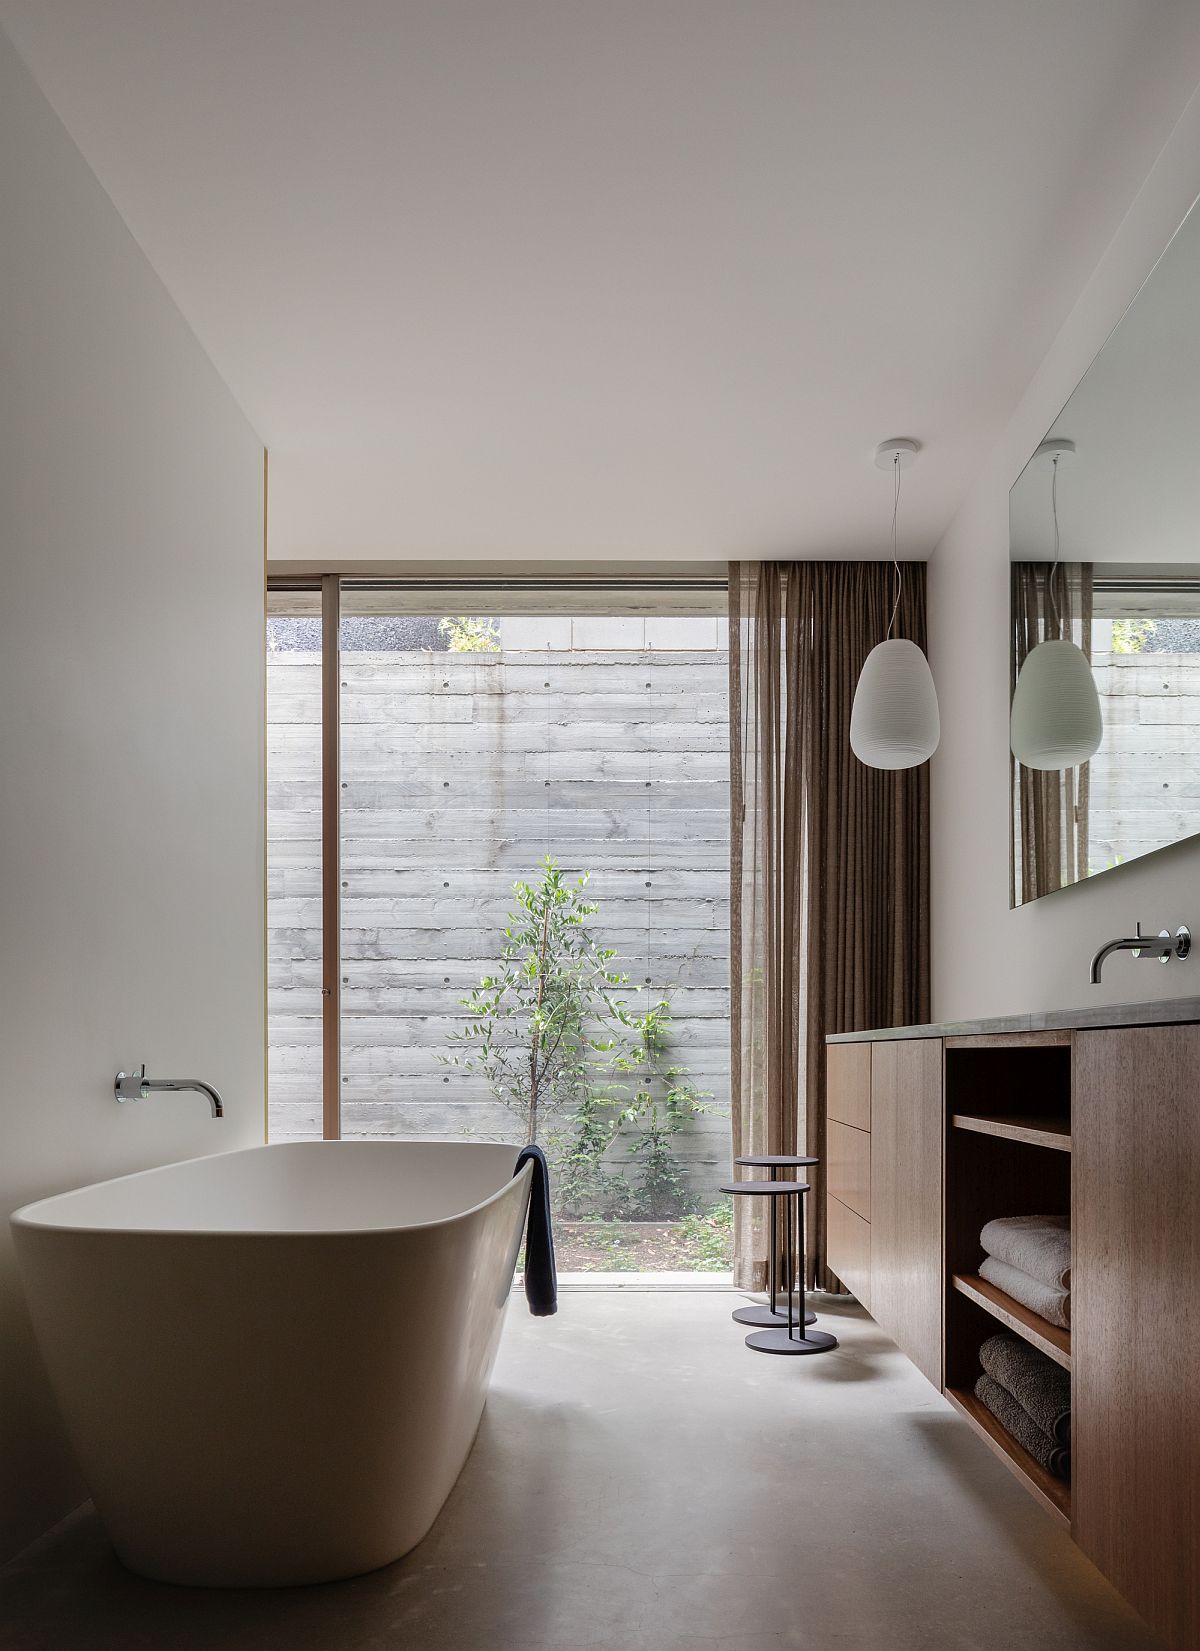 Spacious contemporary bathroom with a standalone bathtub and wooden vanity